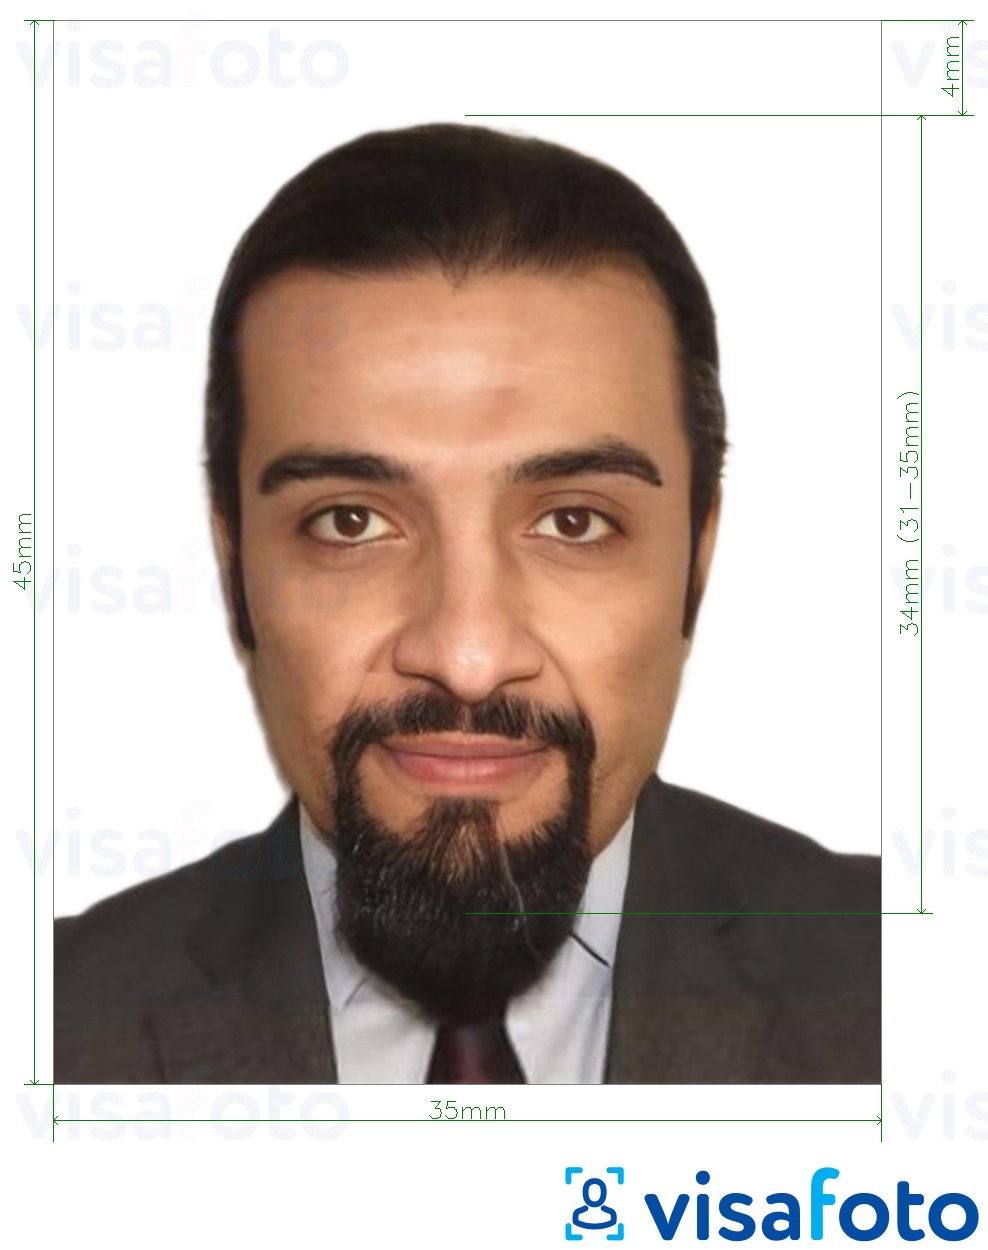 Example of photo for UAE ID card online 35x45 mm ica.gov.ae with exact size specification